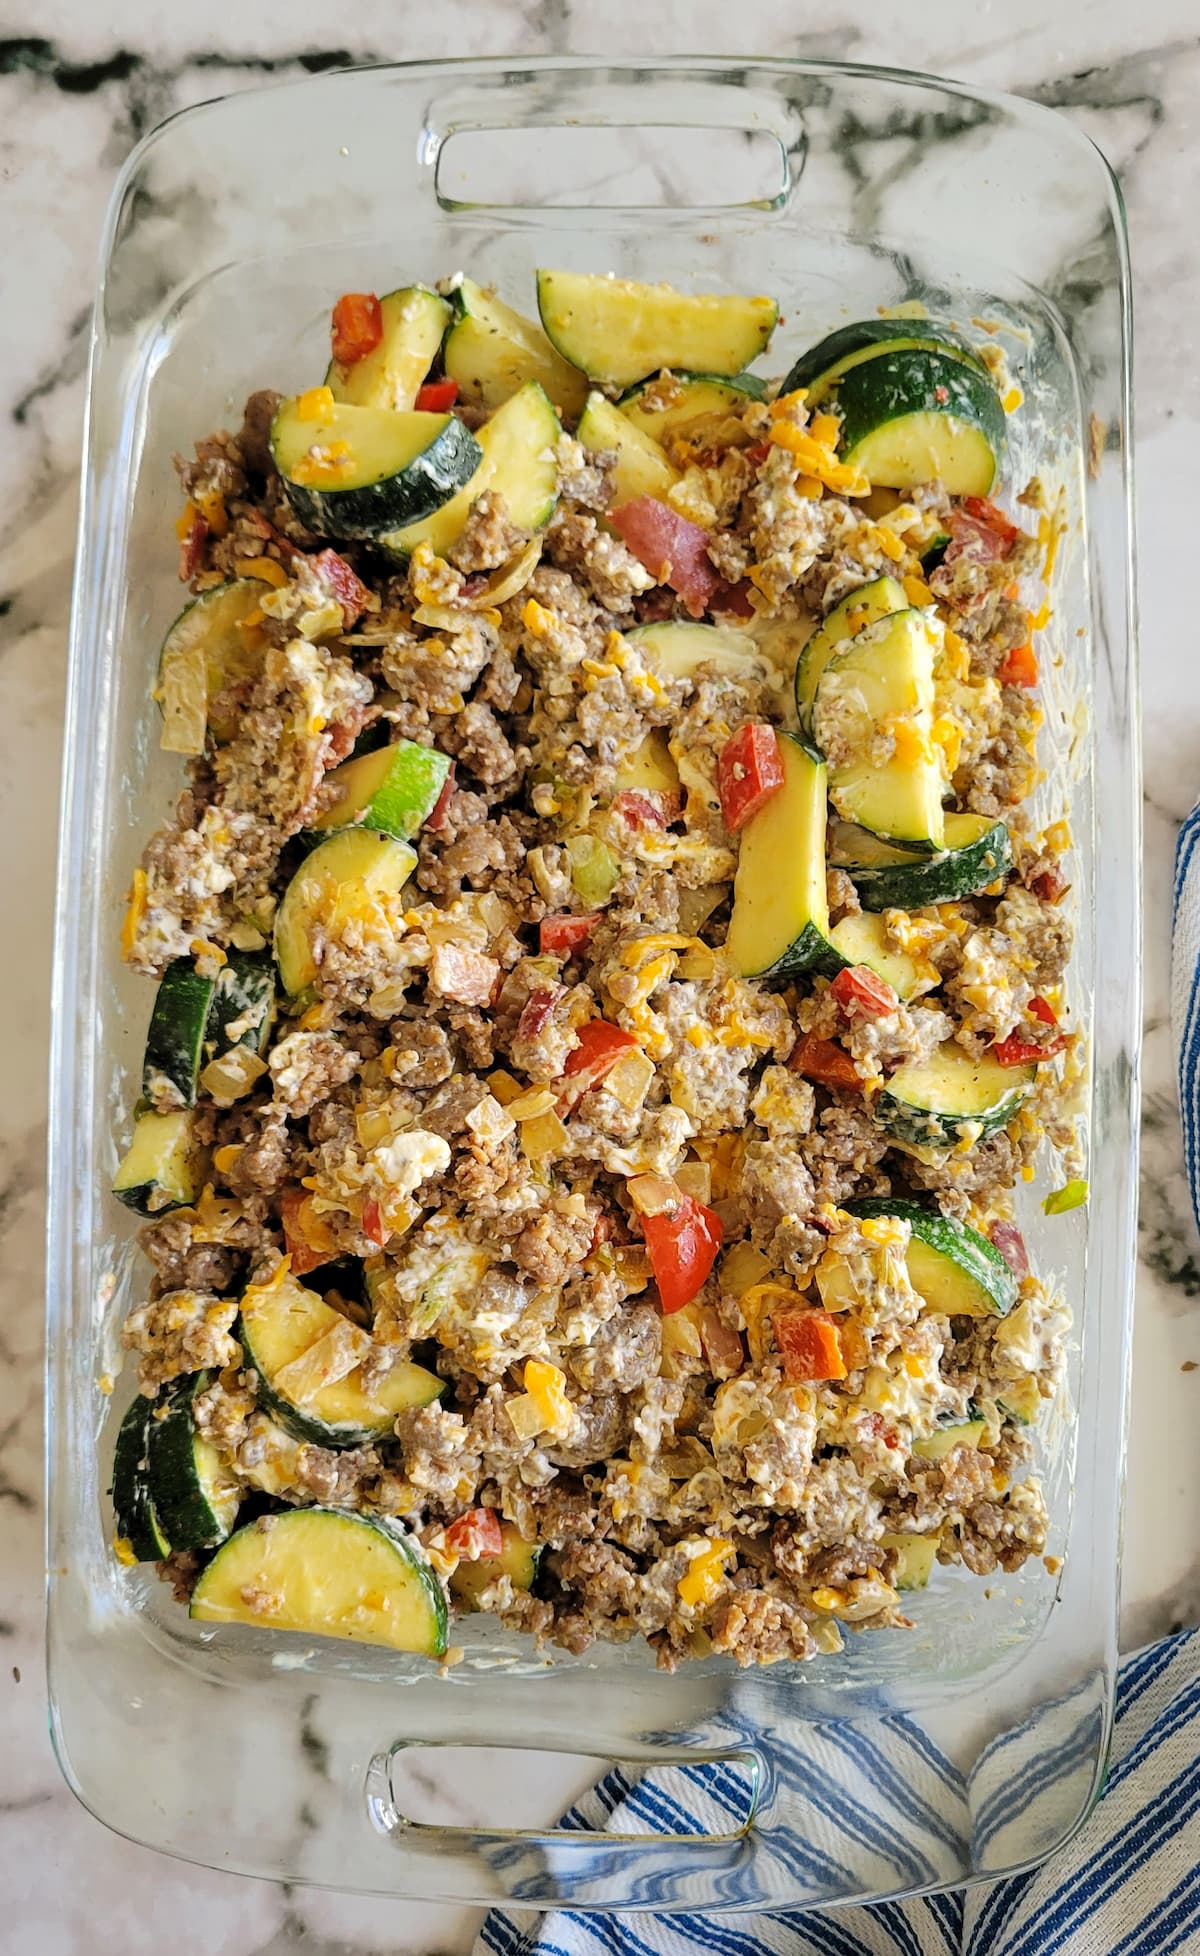 cooked italian sausage, red peppers, zucchini and cheese in a casserole dish